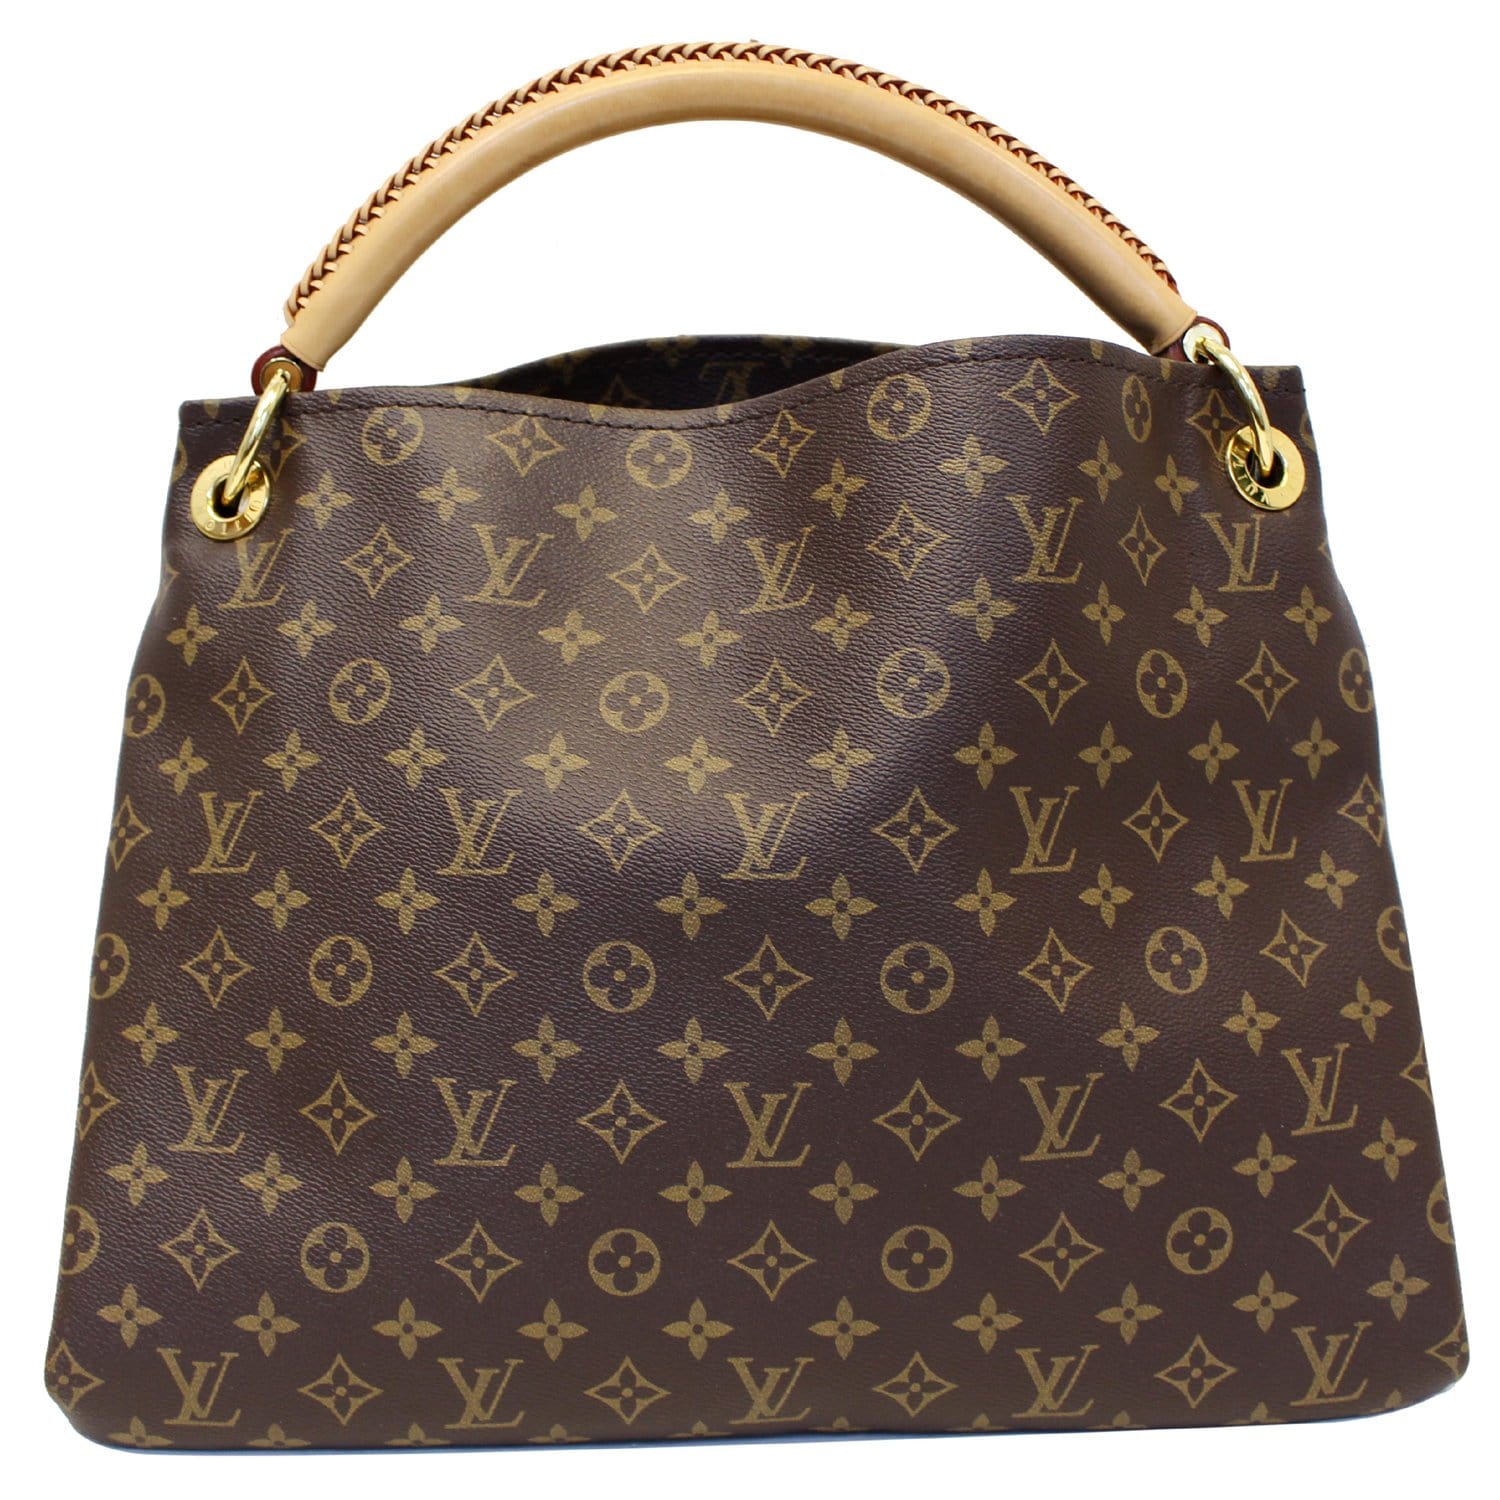 MY TOP 5 MOST USED BAGS Ft Louis Vuitton YSL Ferragamo Chanel   YouTube